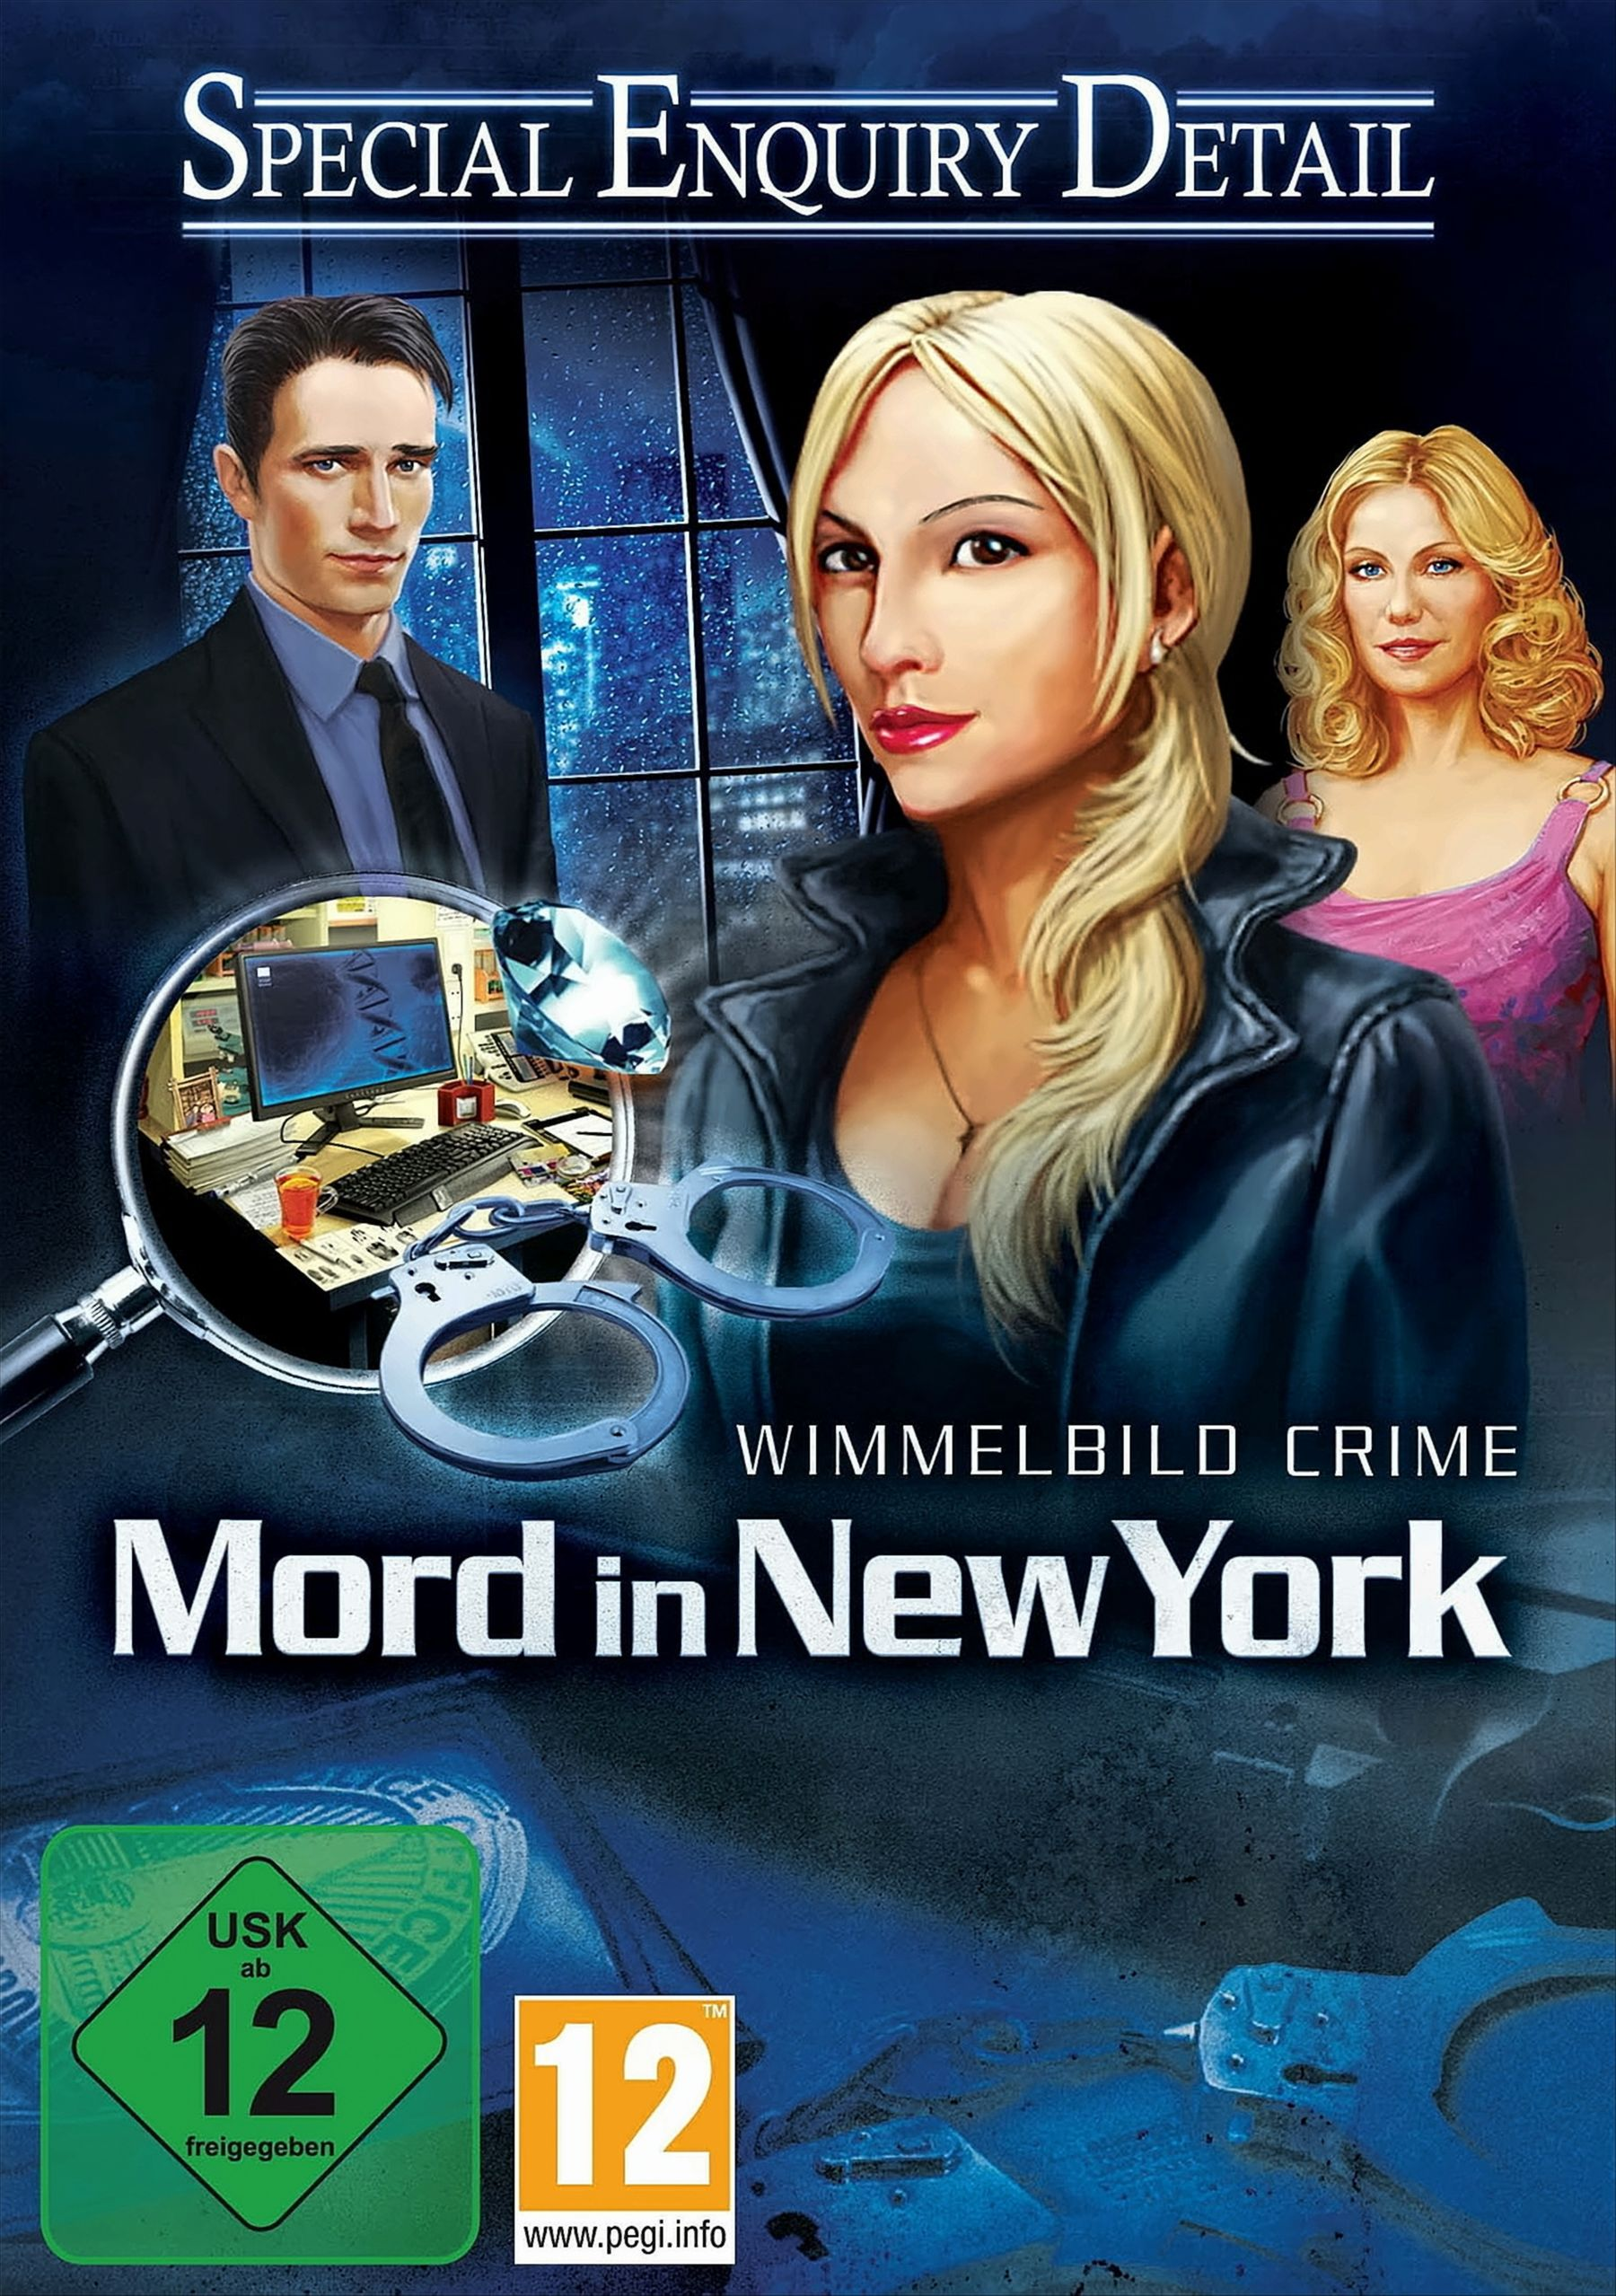 Special Enquiry in [PC] Mord - Detail: York New